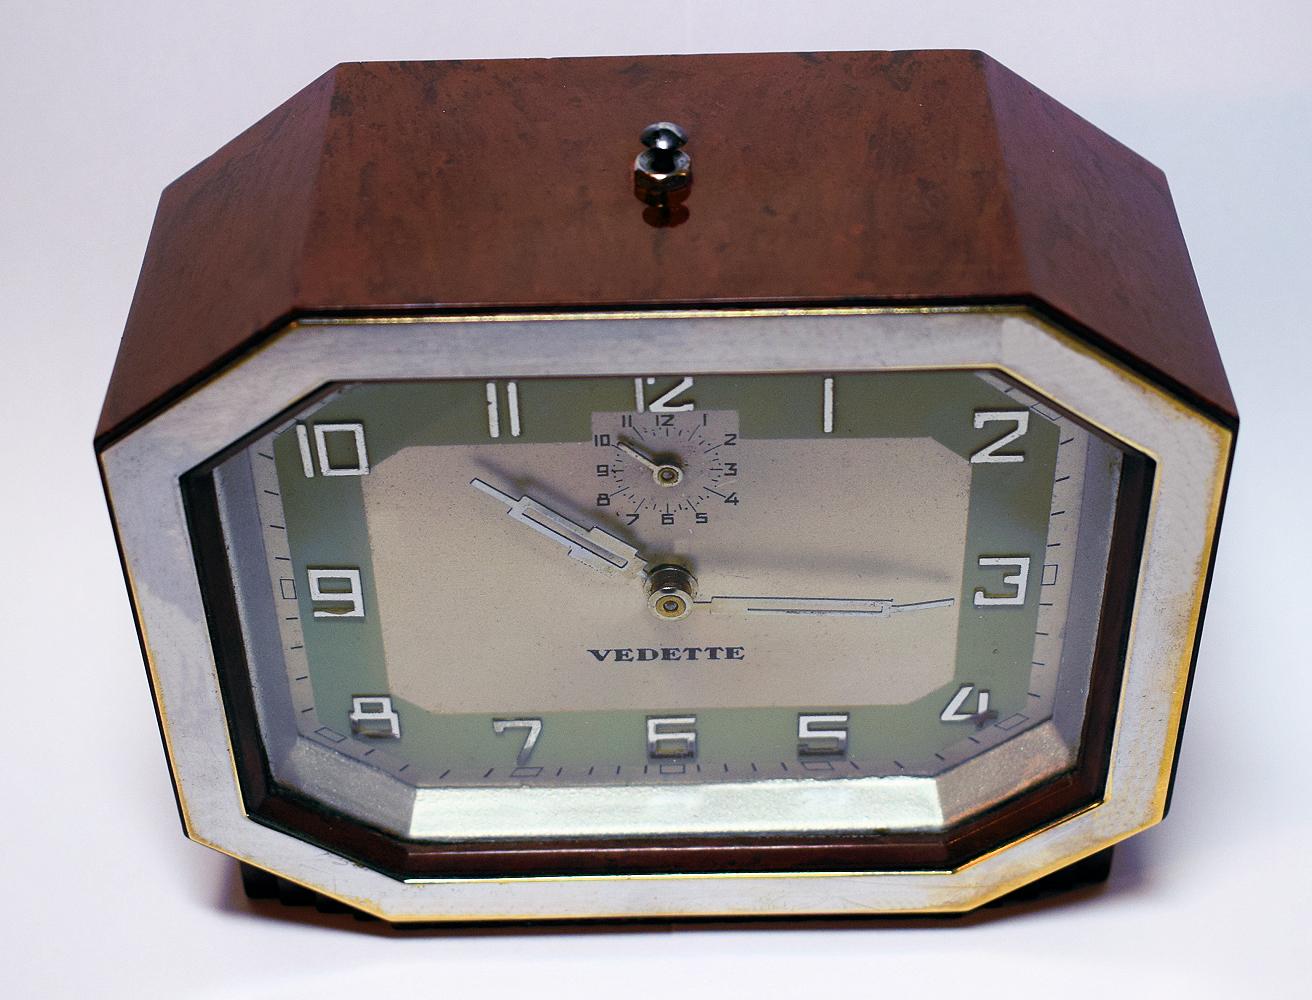 Fabulous 1930s Art Deco clock by Vedette a French clock maker. This clock is in a deep red with black swirls and wonderful geometric casing. The condition of the face is particularly good showing little to no signs of it's true age. The Bakelite